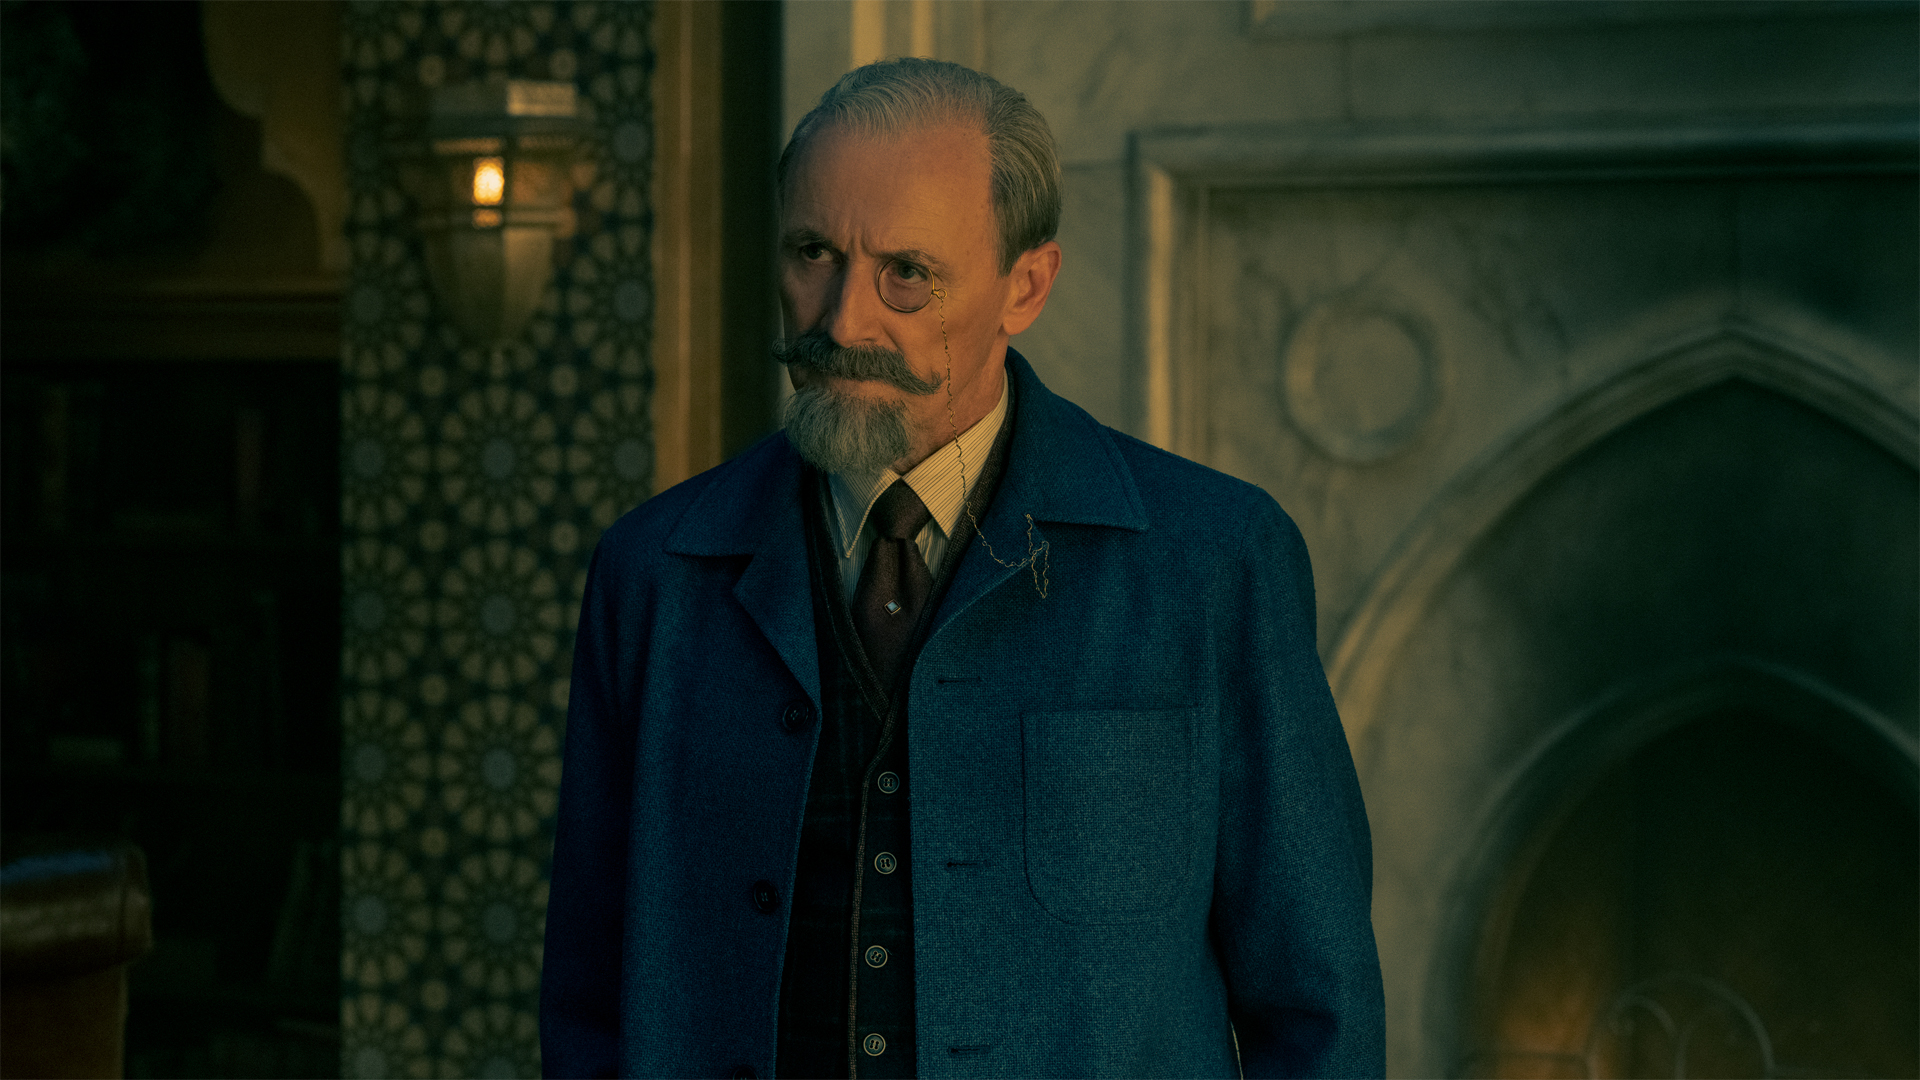 Colm Feore's Sir Reginald Hargreeves is alive in The Umbrella Academy season 3